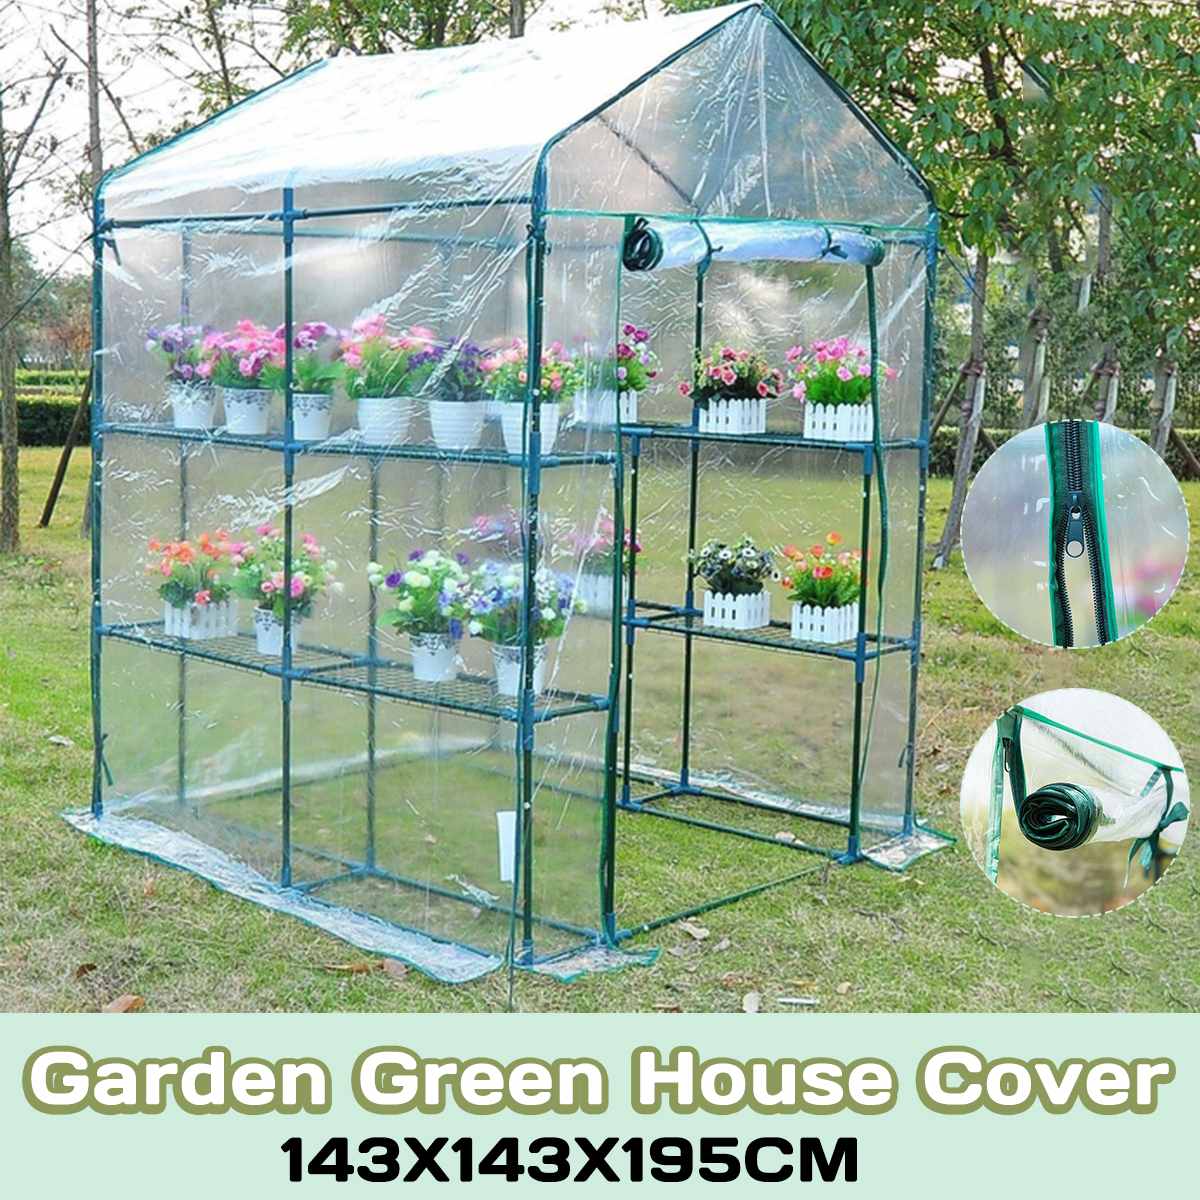 Portable Greenhouse Cover Garden Cover PVC Material Plants Flower House Waterproof Corrosion-resistant Durable 143X143X195cm